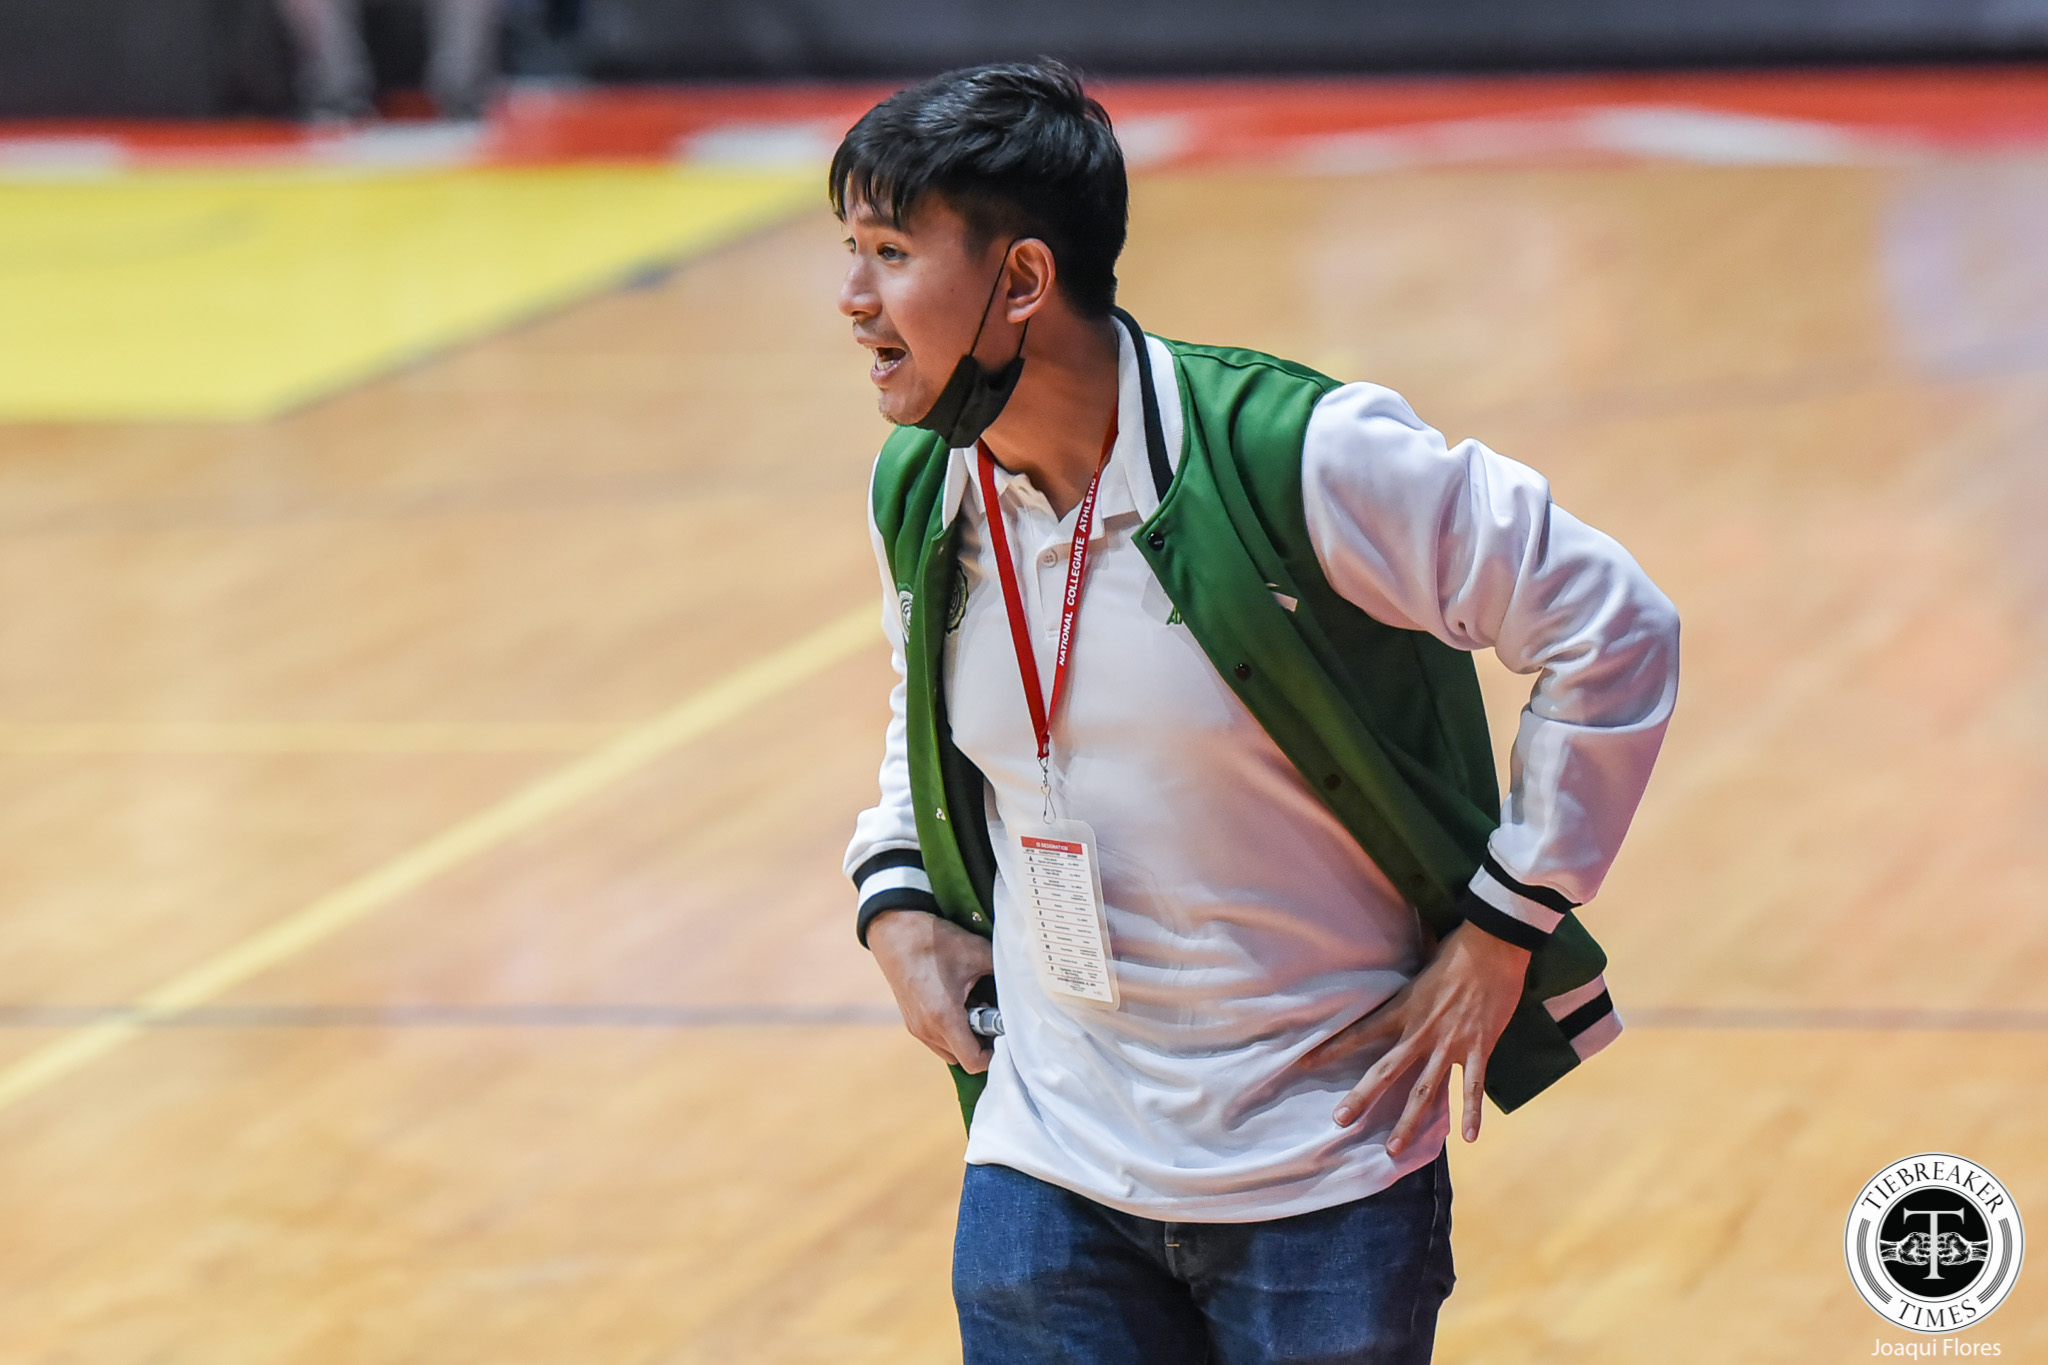 NCAA-98-Basketball-CSB-vs.-LPU-Charles-Tiu-7309 Lepalam admits he almost went to Letran, but opted to stay with CSB family Basketball CSB NCAA News  - philippine sports news